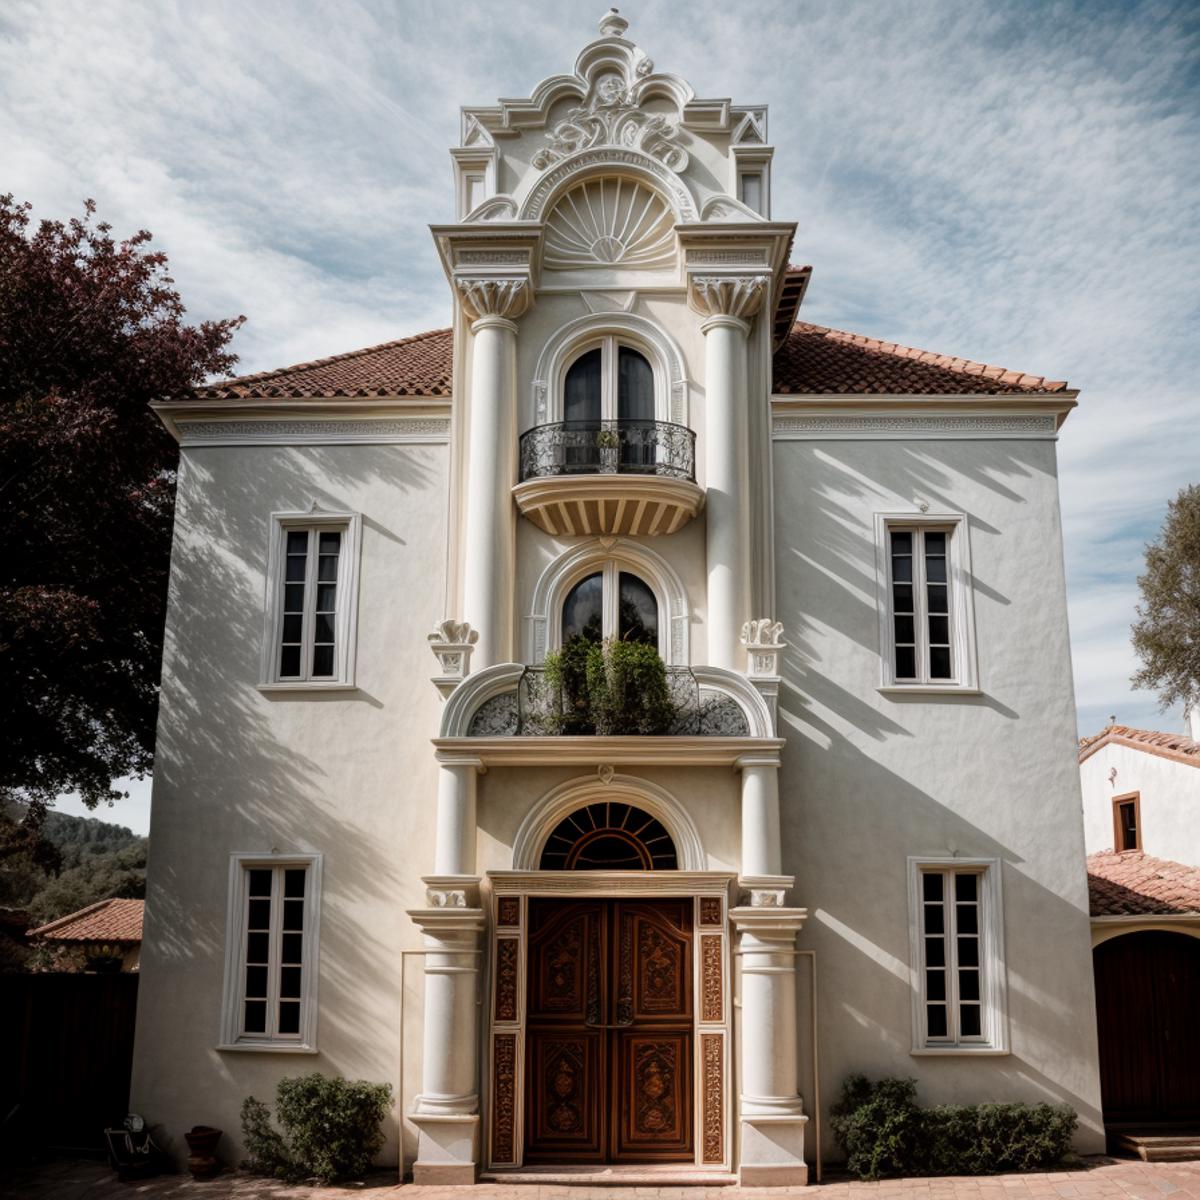 Baroque Architecture Style for small house image by architech1904